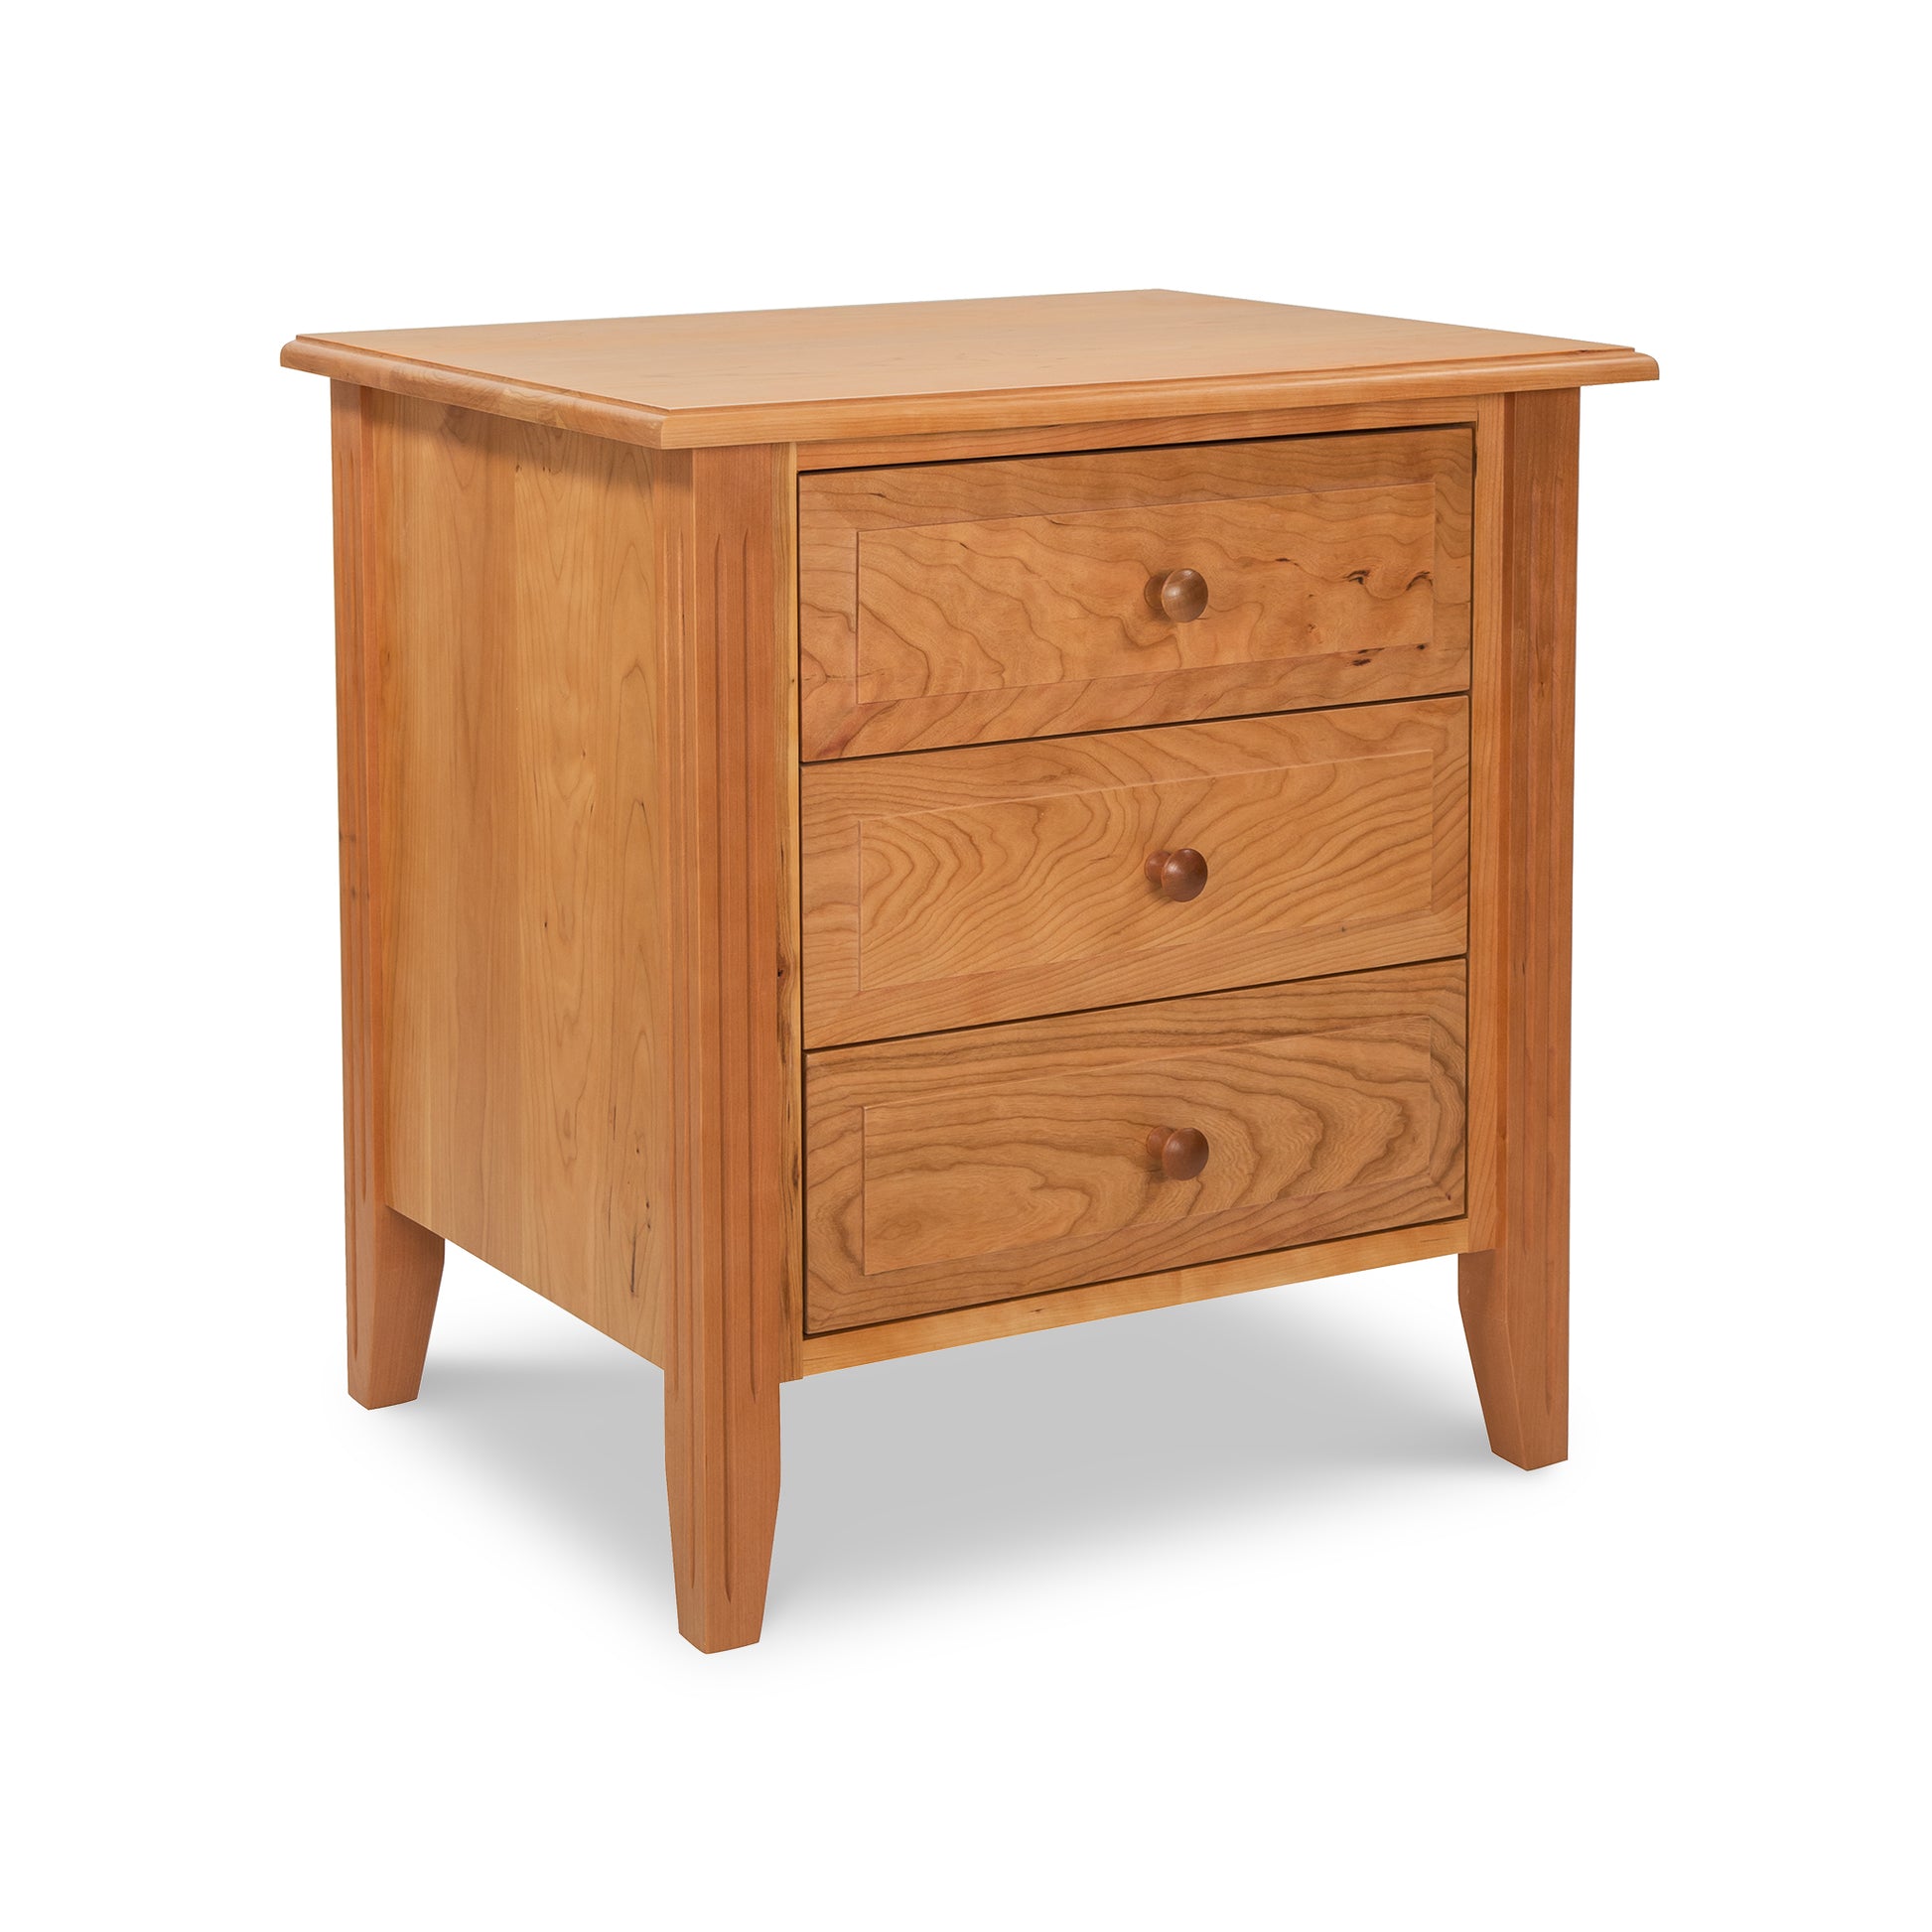 This Renfrew Shaker 3-Drawer Nightstand, exquisitely handmade with top-notch wood, boasts three spacious drawers. It is made by Lyndon Furniture.